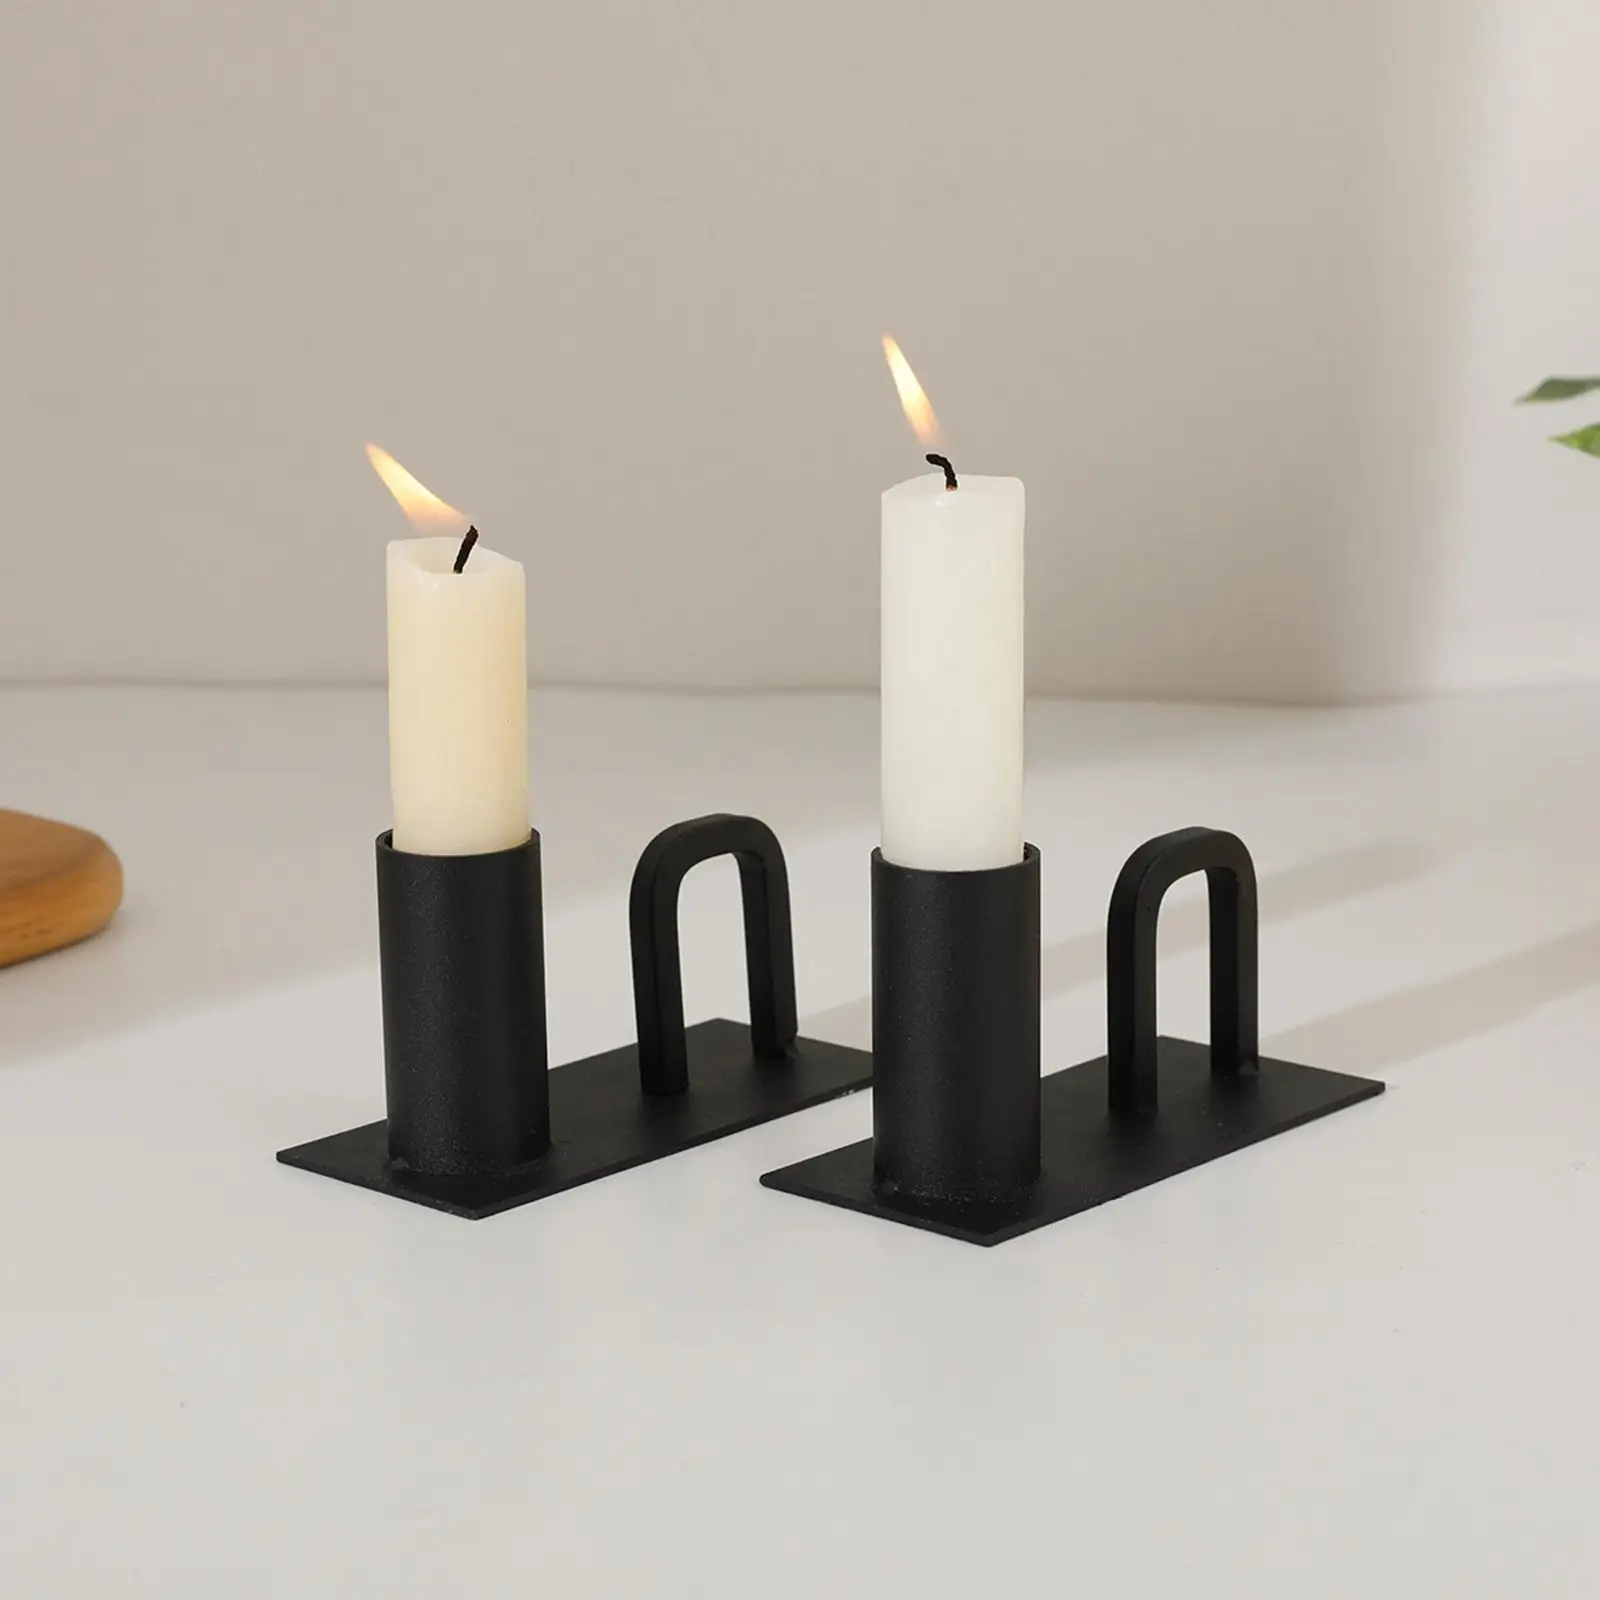 2x Tealight Candleholder Holiday Iron Candle Holder Metal Candlestick for Valentine`s Day Party Mantel Church Votive Candles